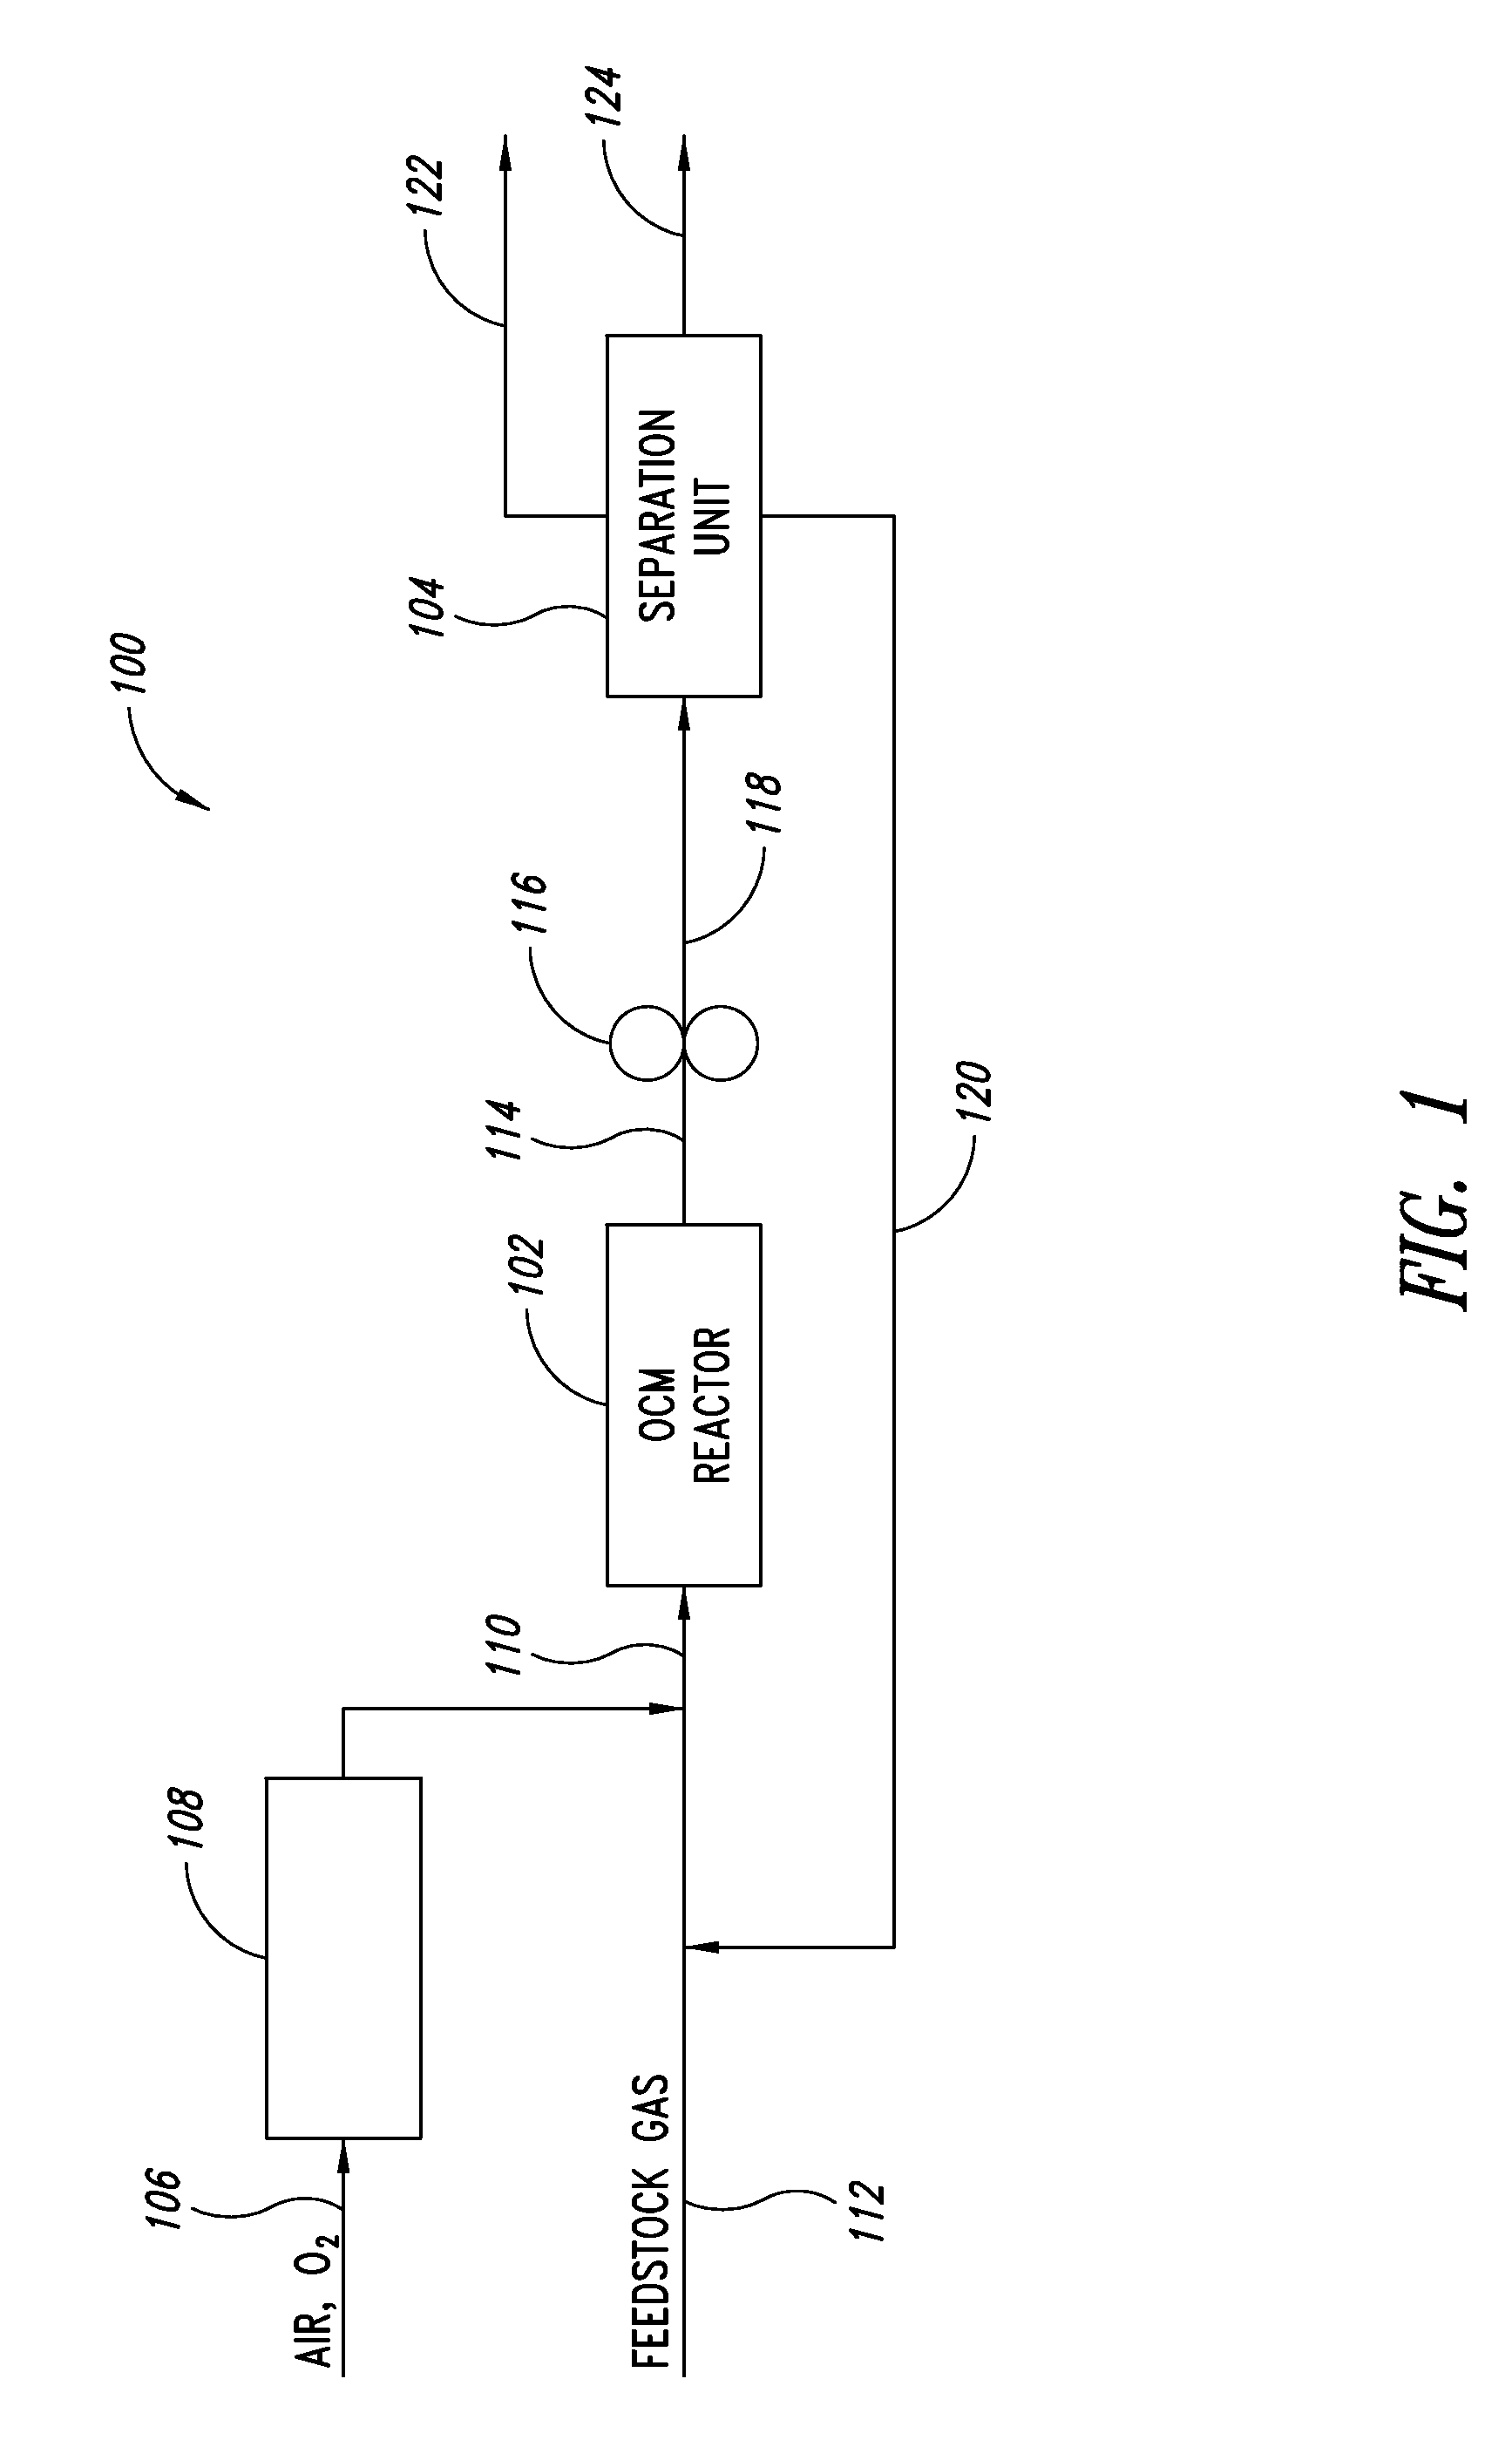 Process for separating hydrocarbon compounds